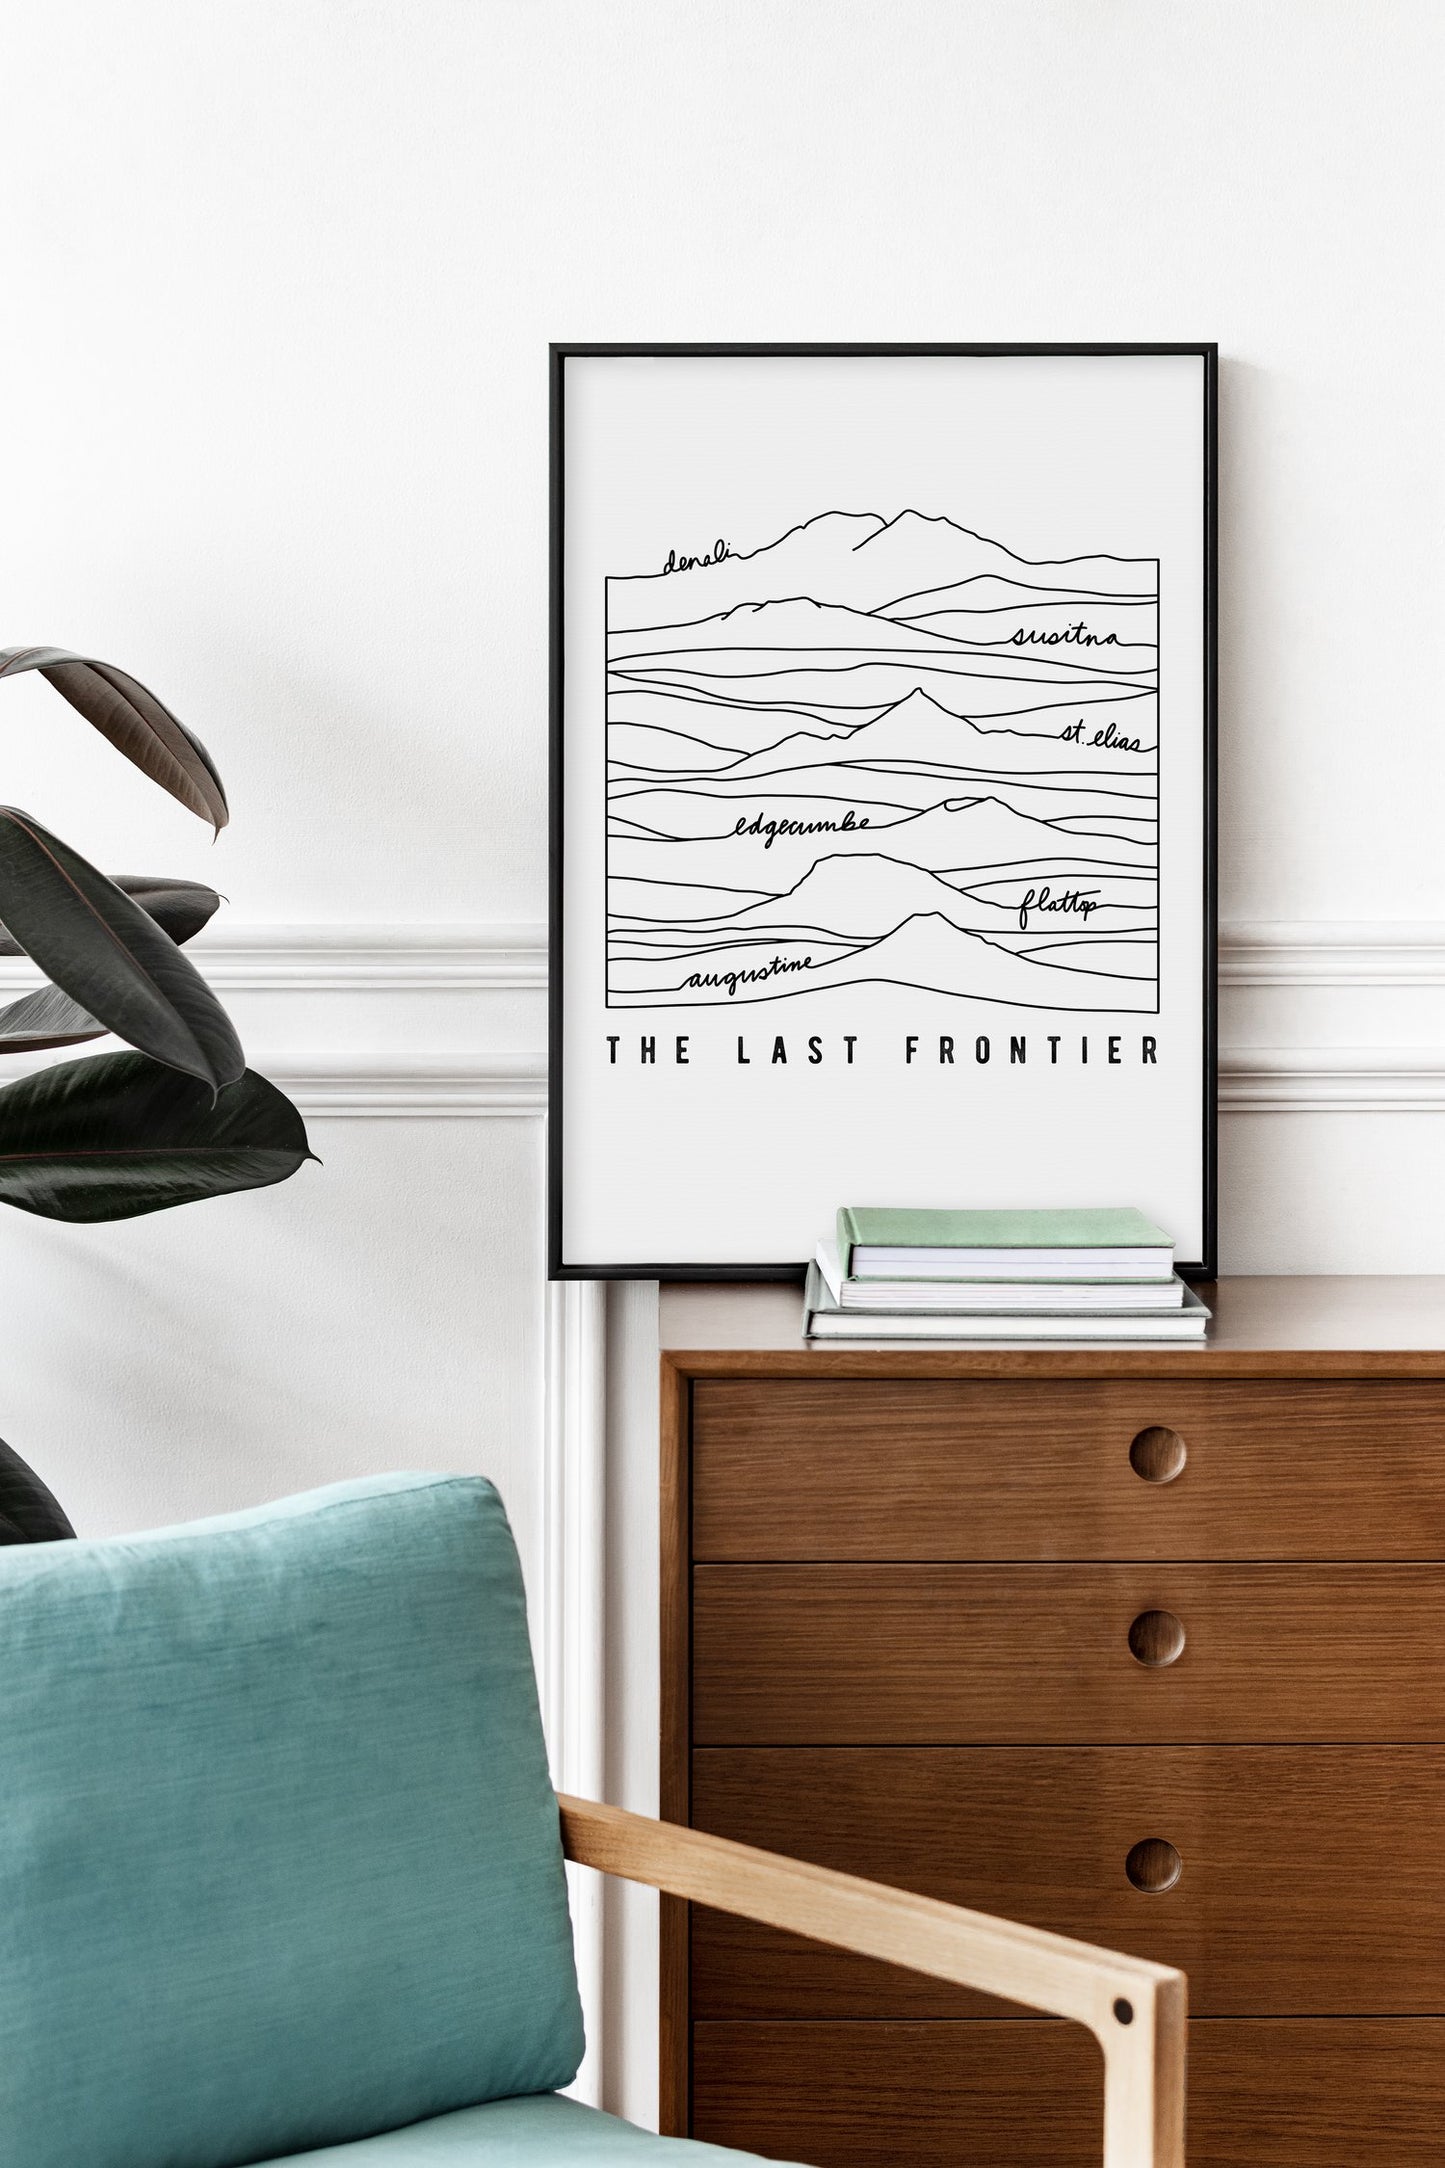 Fault Lines Print by Printworthy